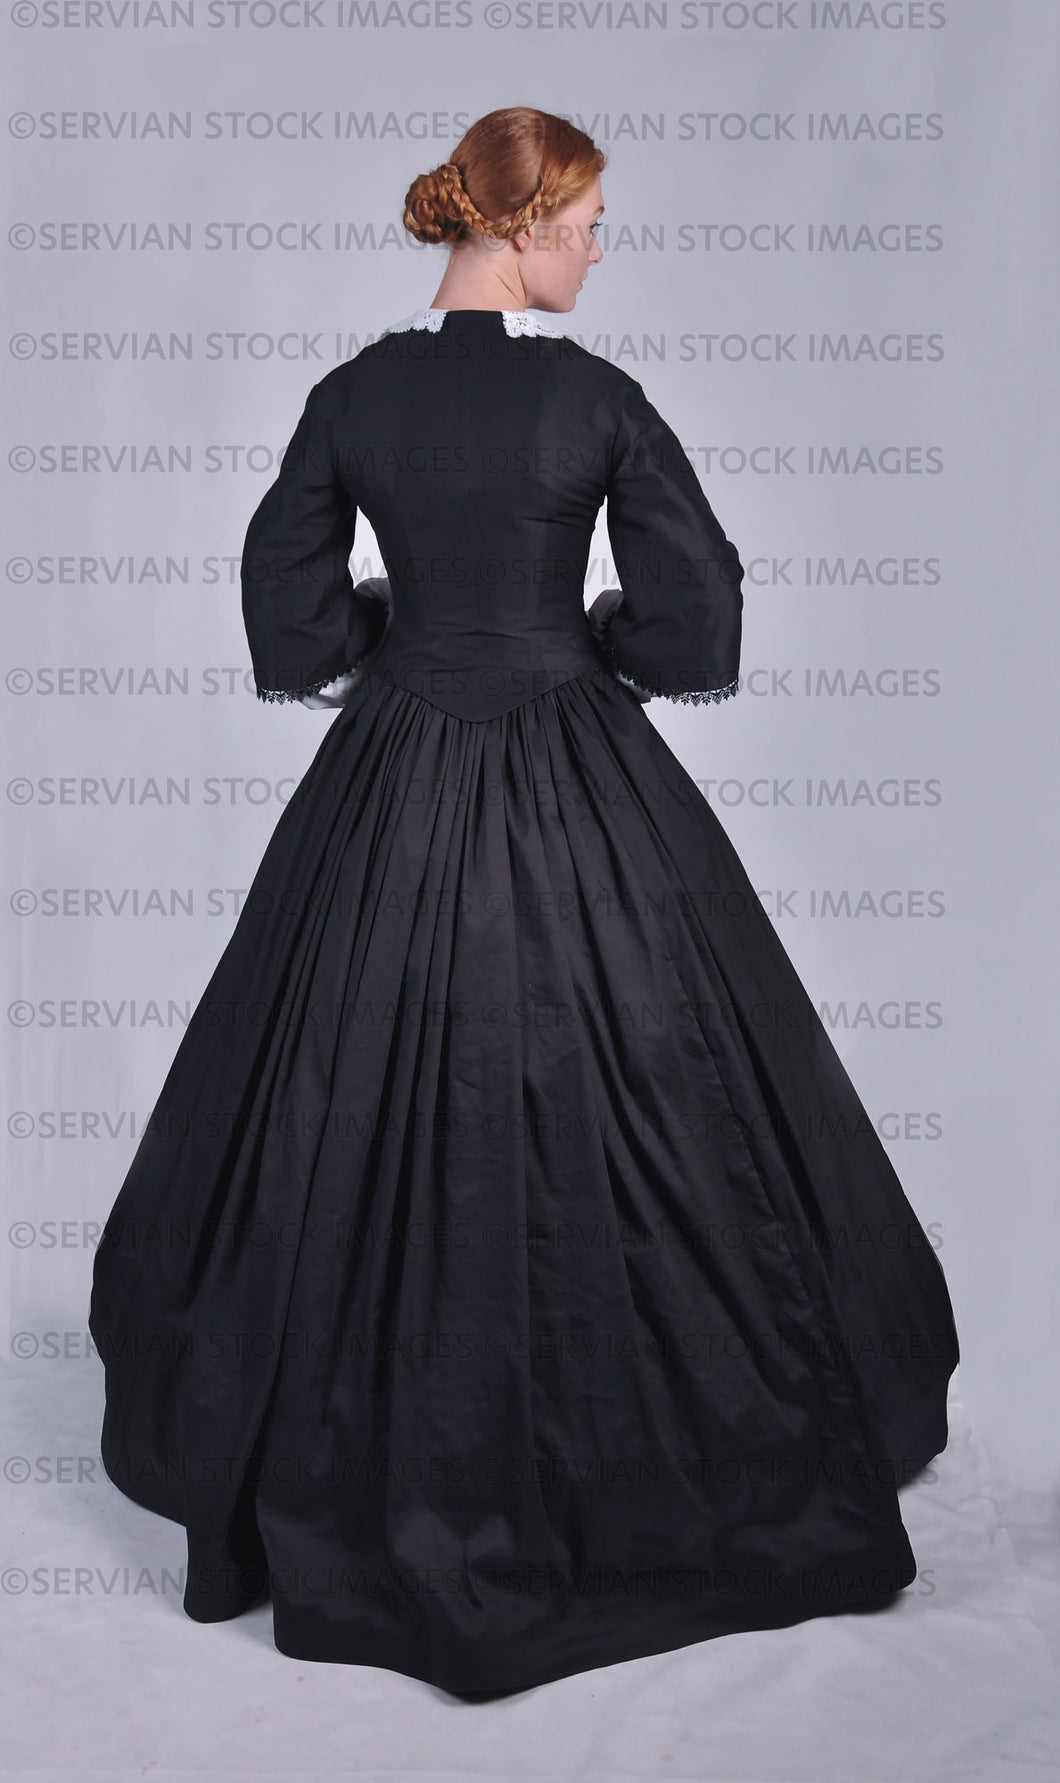 Victorian woman in a black ensemble with a lace collar  (Lauren 0778)